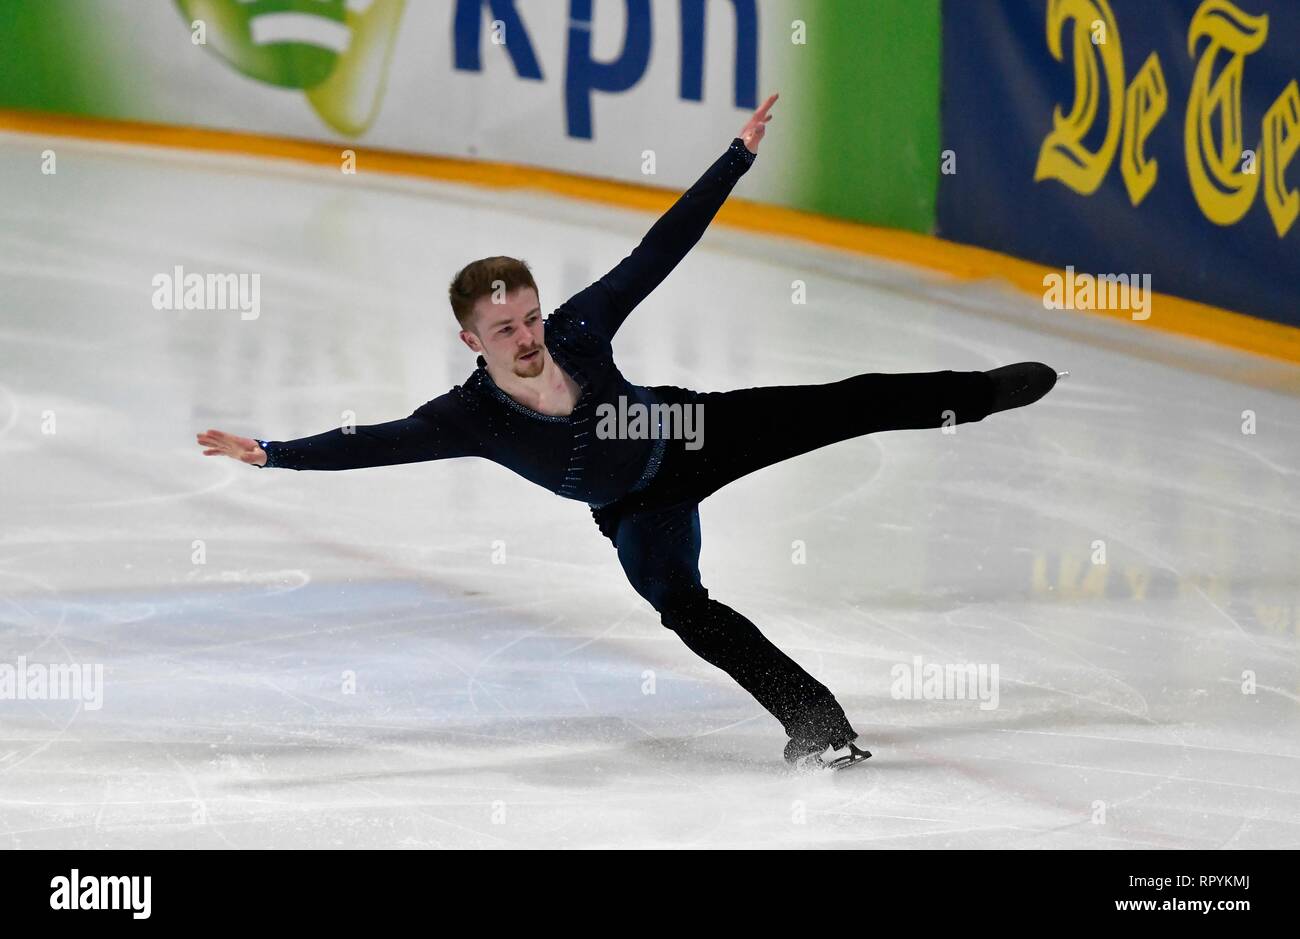 Figure skating: Challenge Cup 2019 on February 22,2019 at The Uithof in The Hague, Holland. Peter-James HALLAM (GBR) in Men Senior - Short Program (Photo by Soenar Chamid/AFLO) Stock Photo